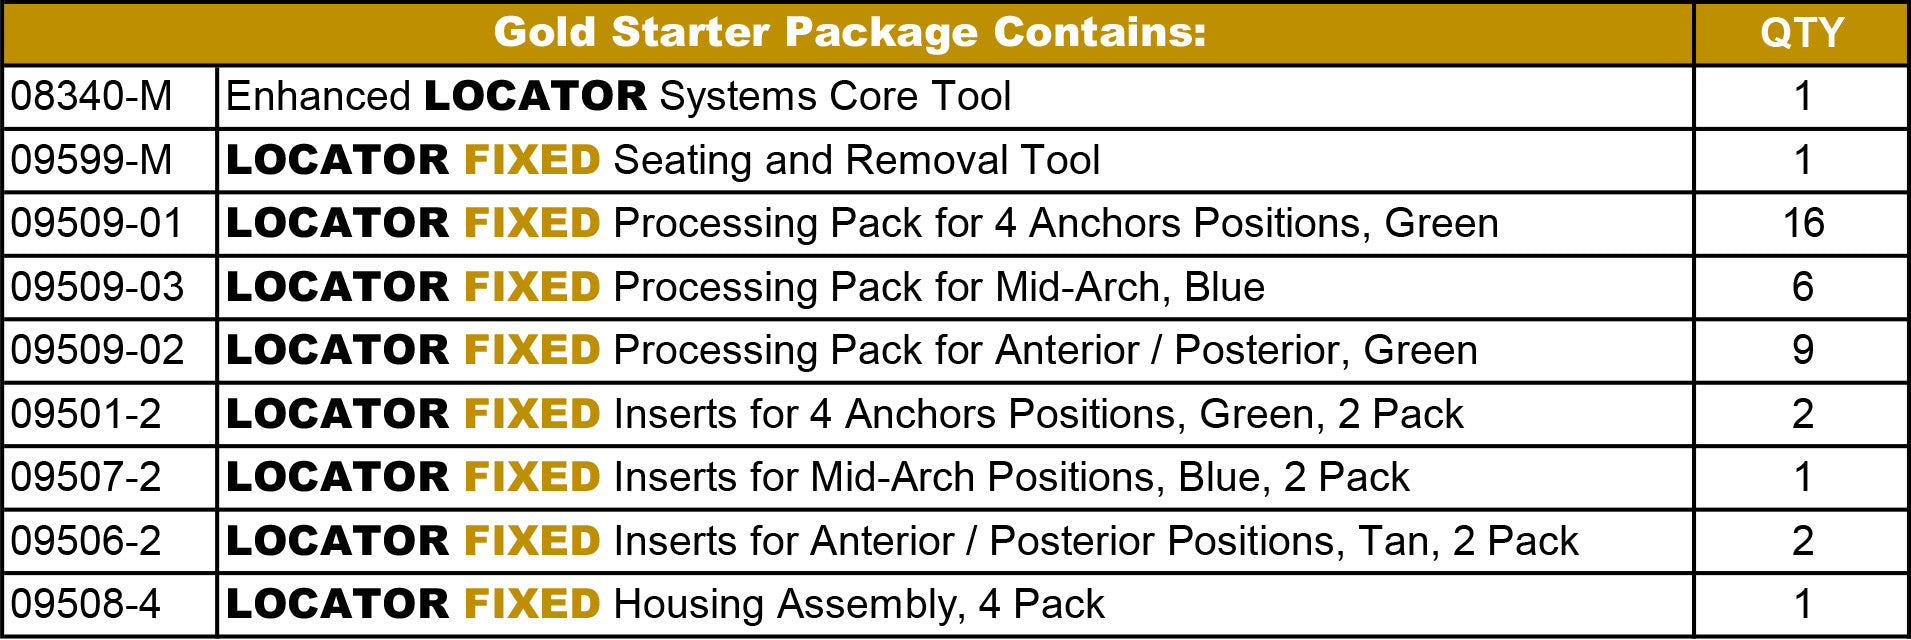 LOCATOR FIXED Gold STARTER Package (7 Arches)